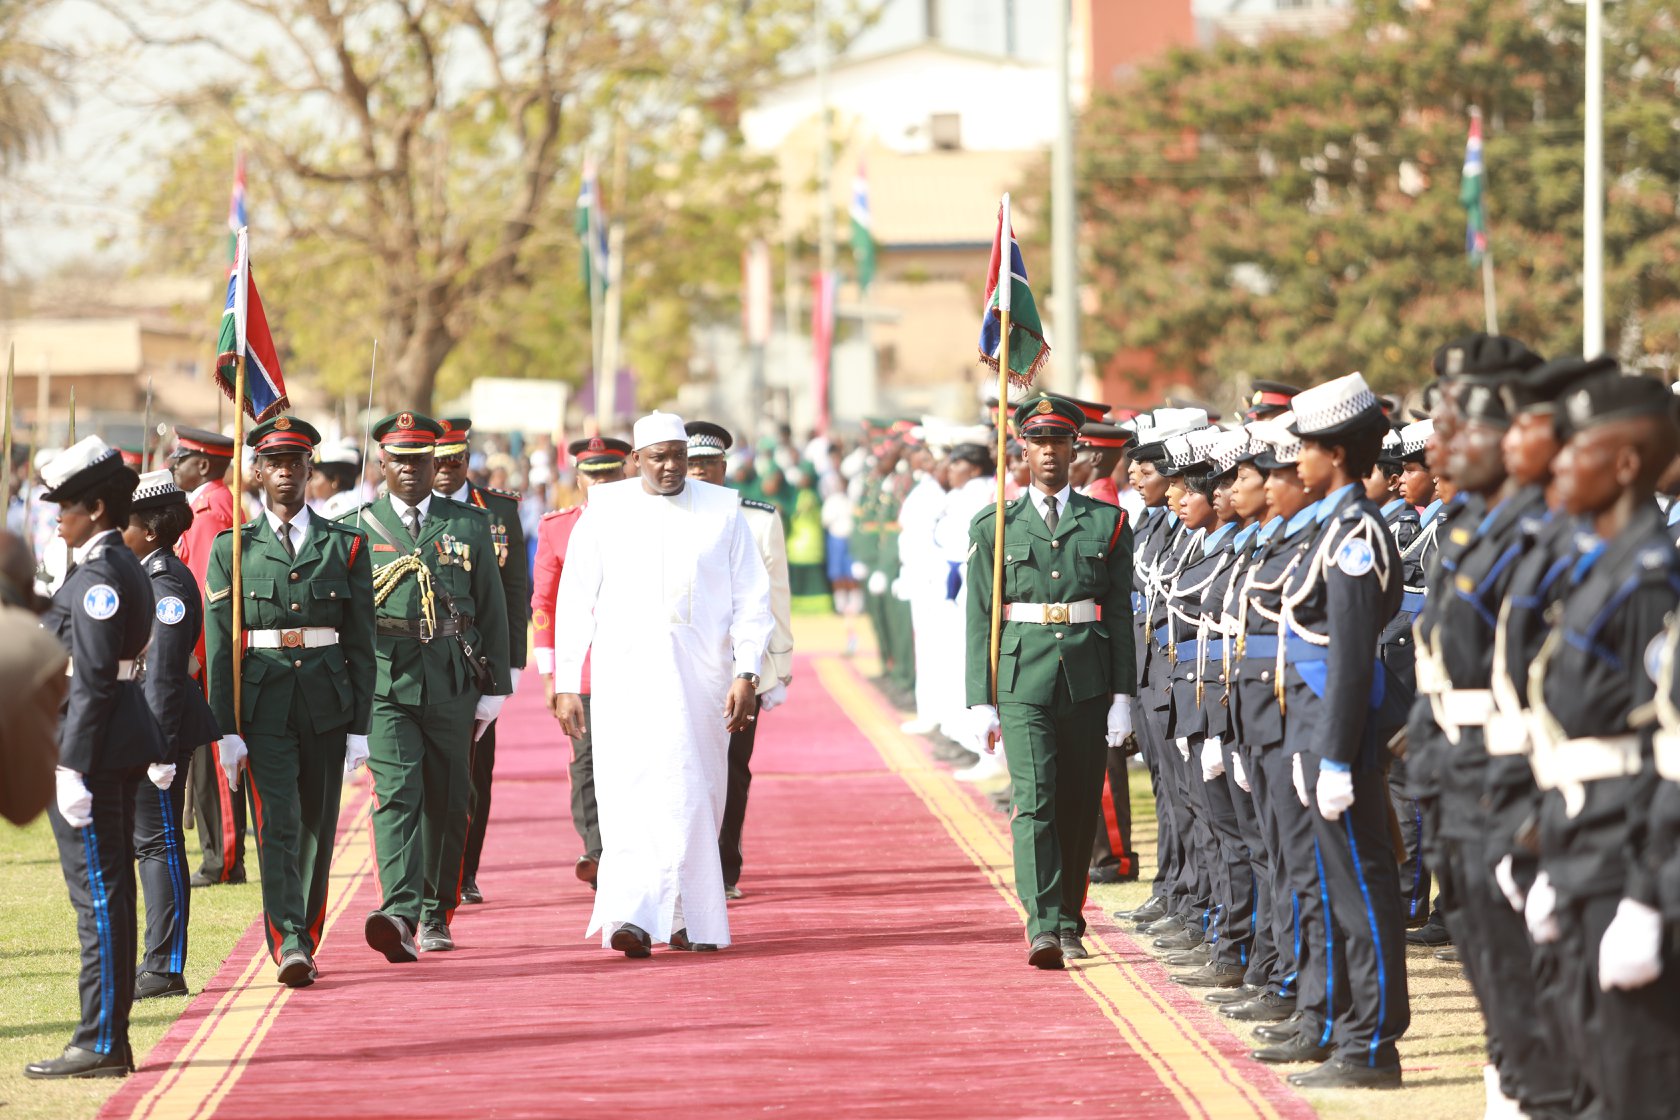 President Barrow inspecting the Guard of Honour mounted by the Armed and security forces during The Gambia's 54th Independence Anniversary Celebration at the McCarthy Square 